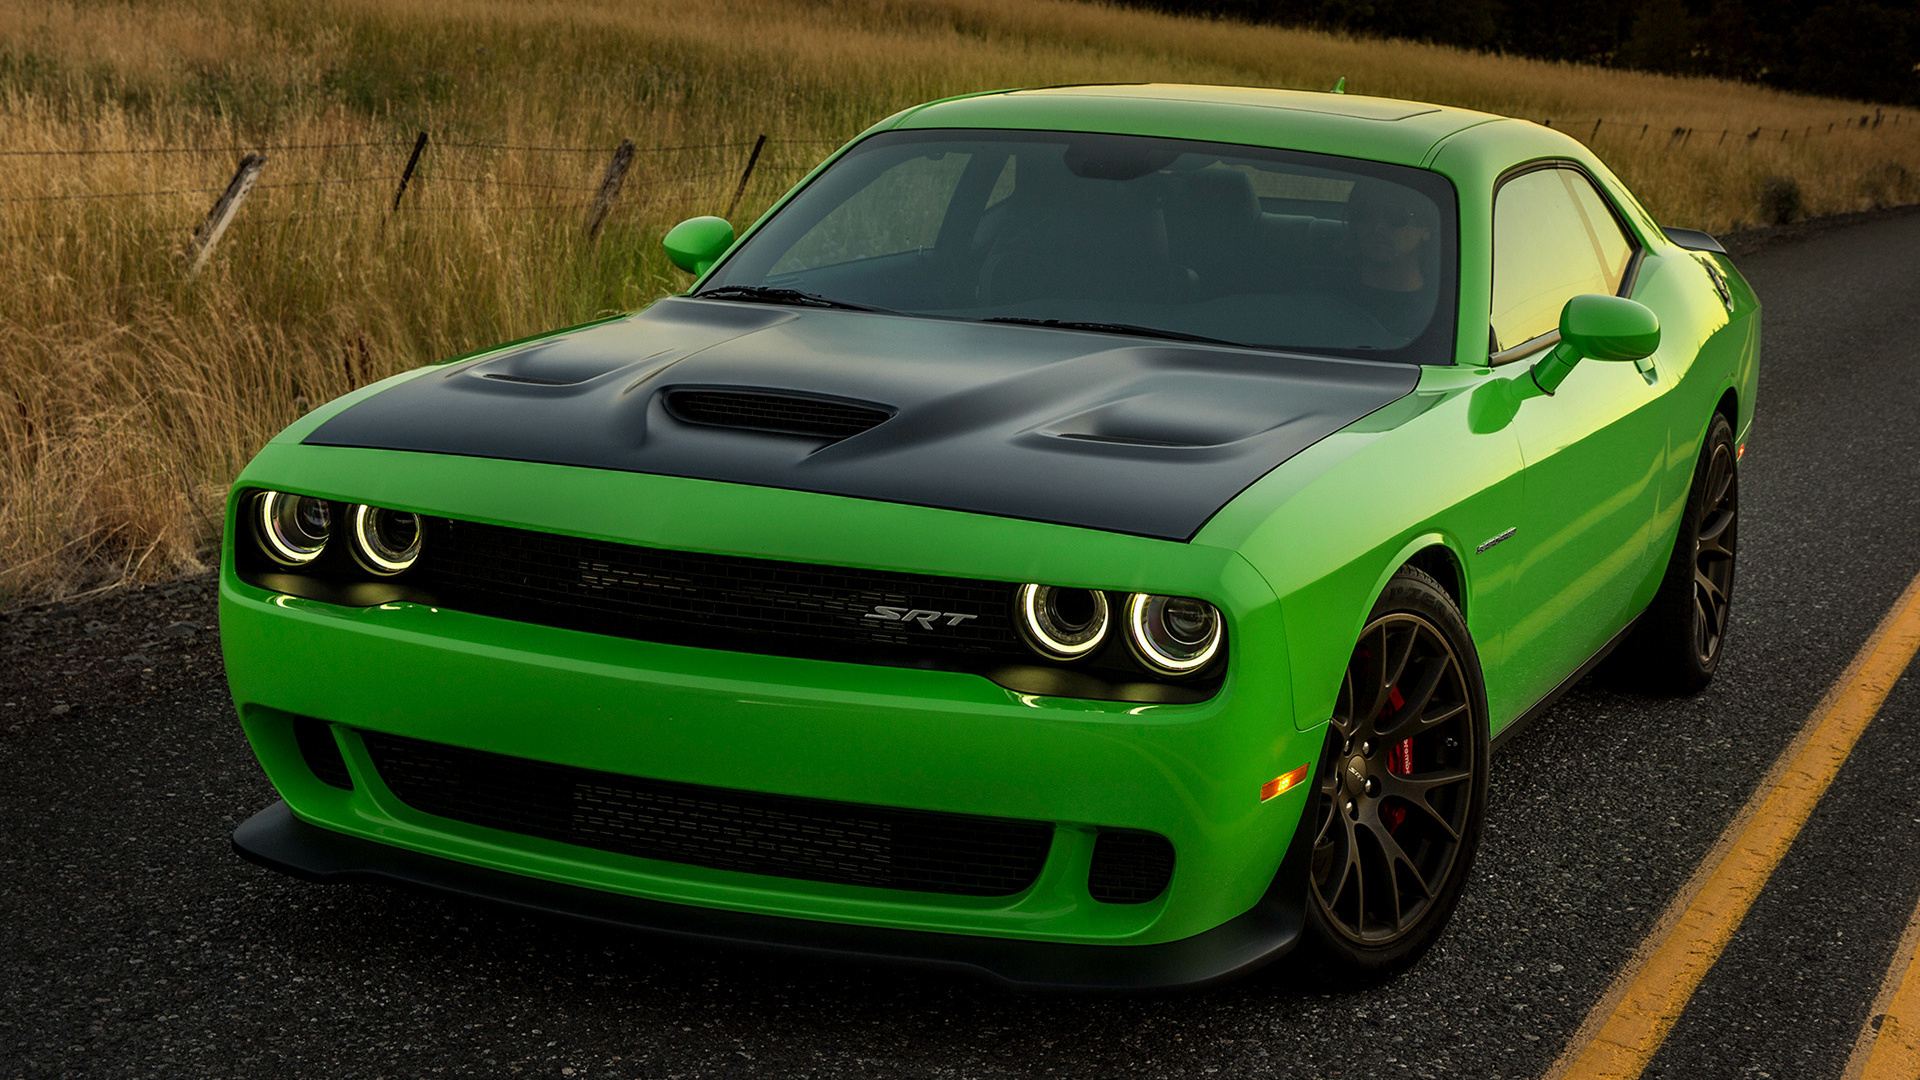 Dodge Challenger Srt Hellcat Wallpapers And Hd Images - Dodge Challenger Srt Hellcat Hd - HD Wallpaper 